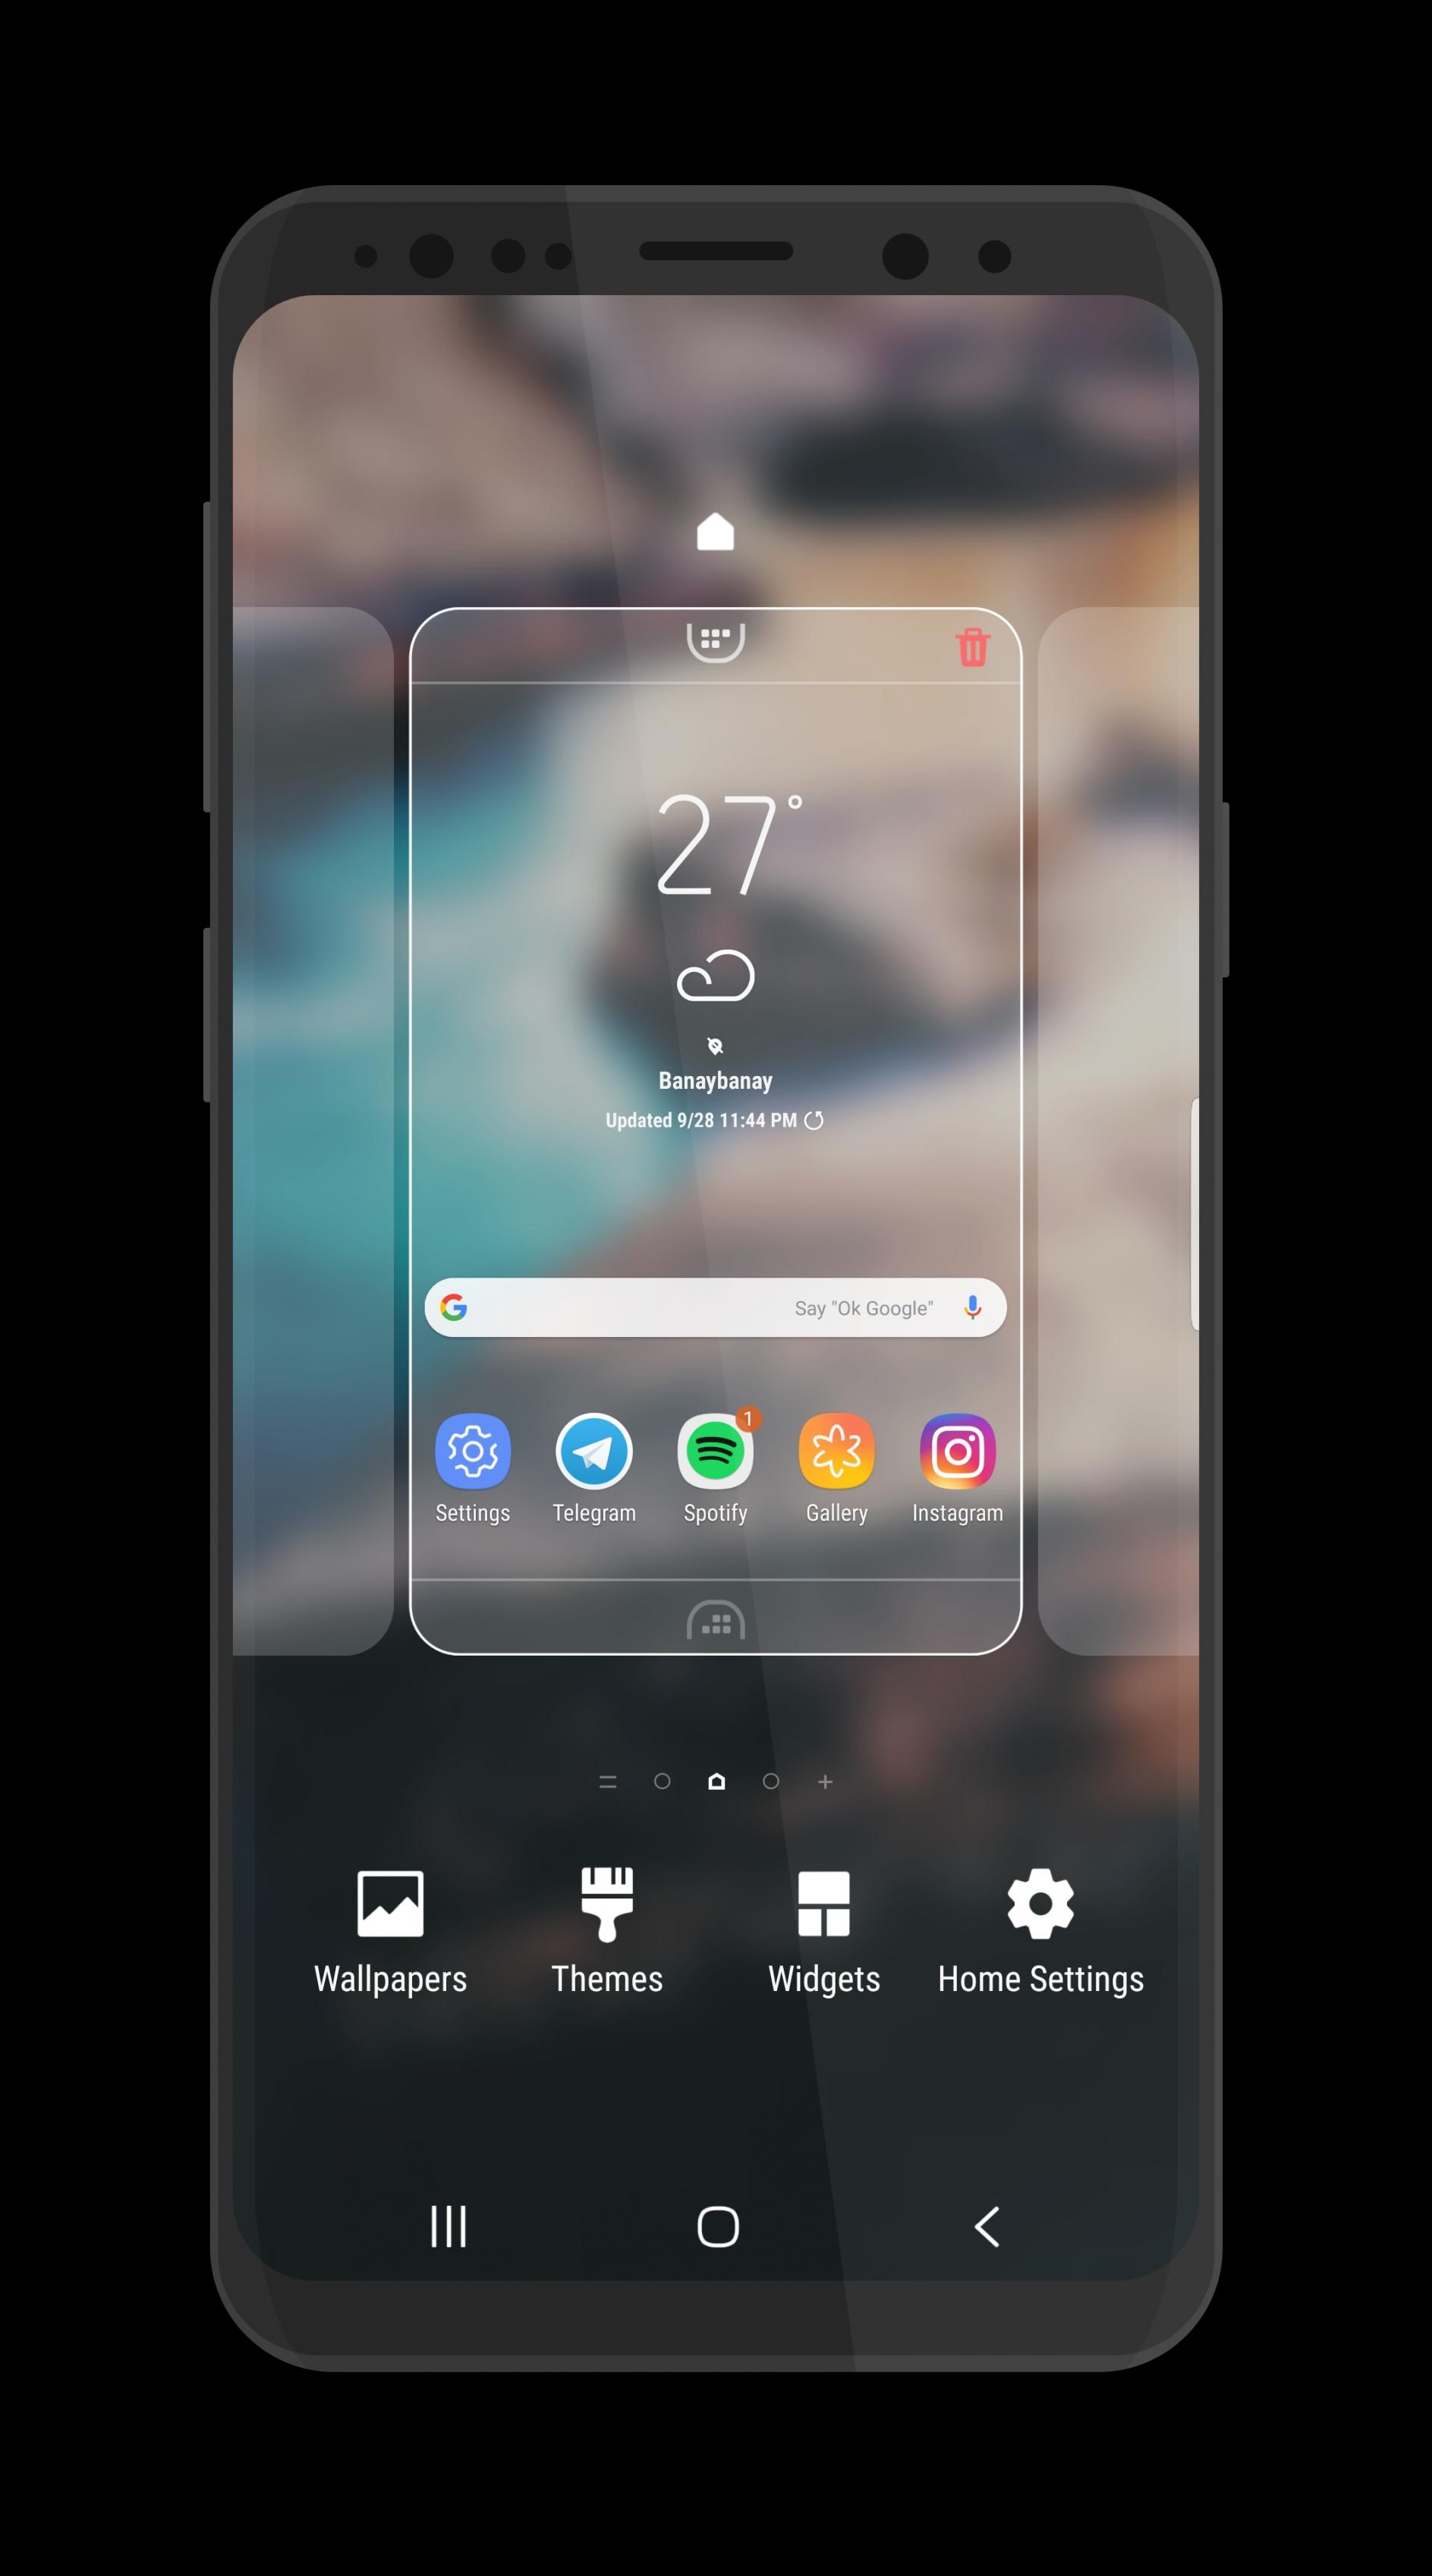 Install Samsung Experience 10 Theme on Samsung Galaxy S9 and Galaxy S8